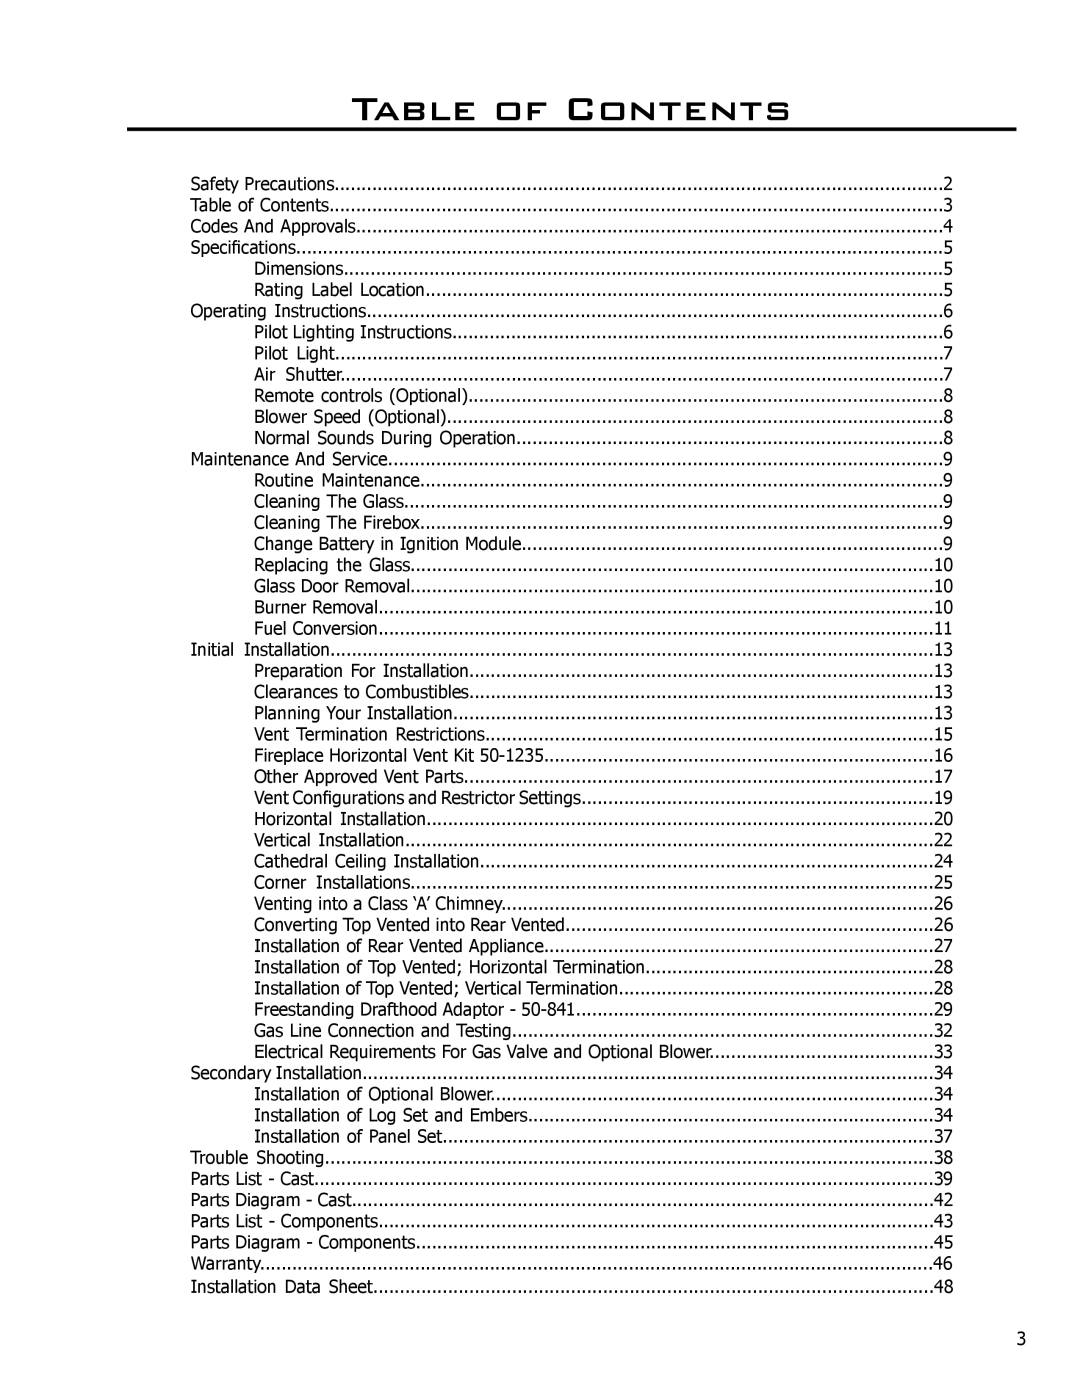 Enviro 50-1033 owner manual Table of Contents 